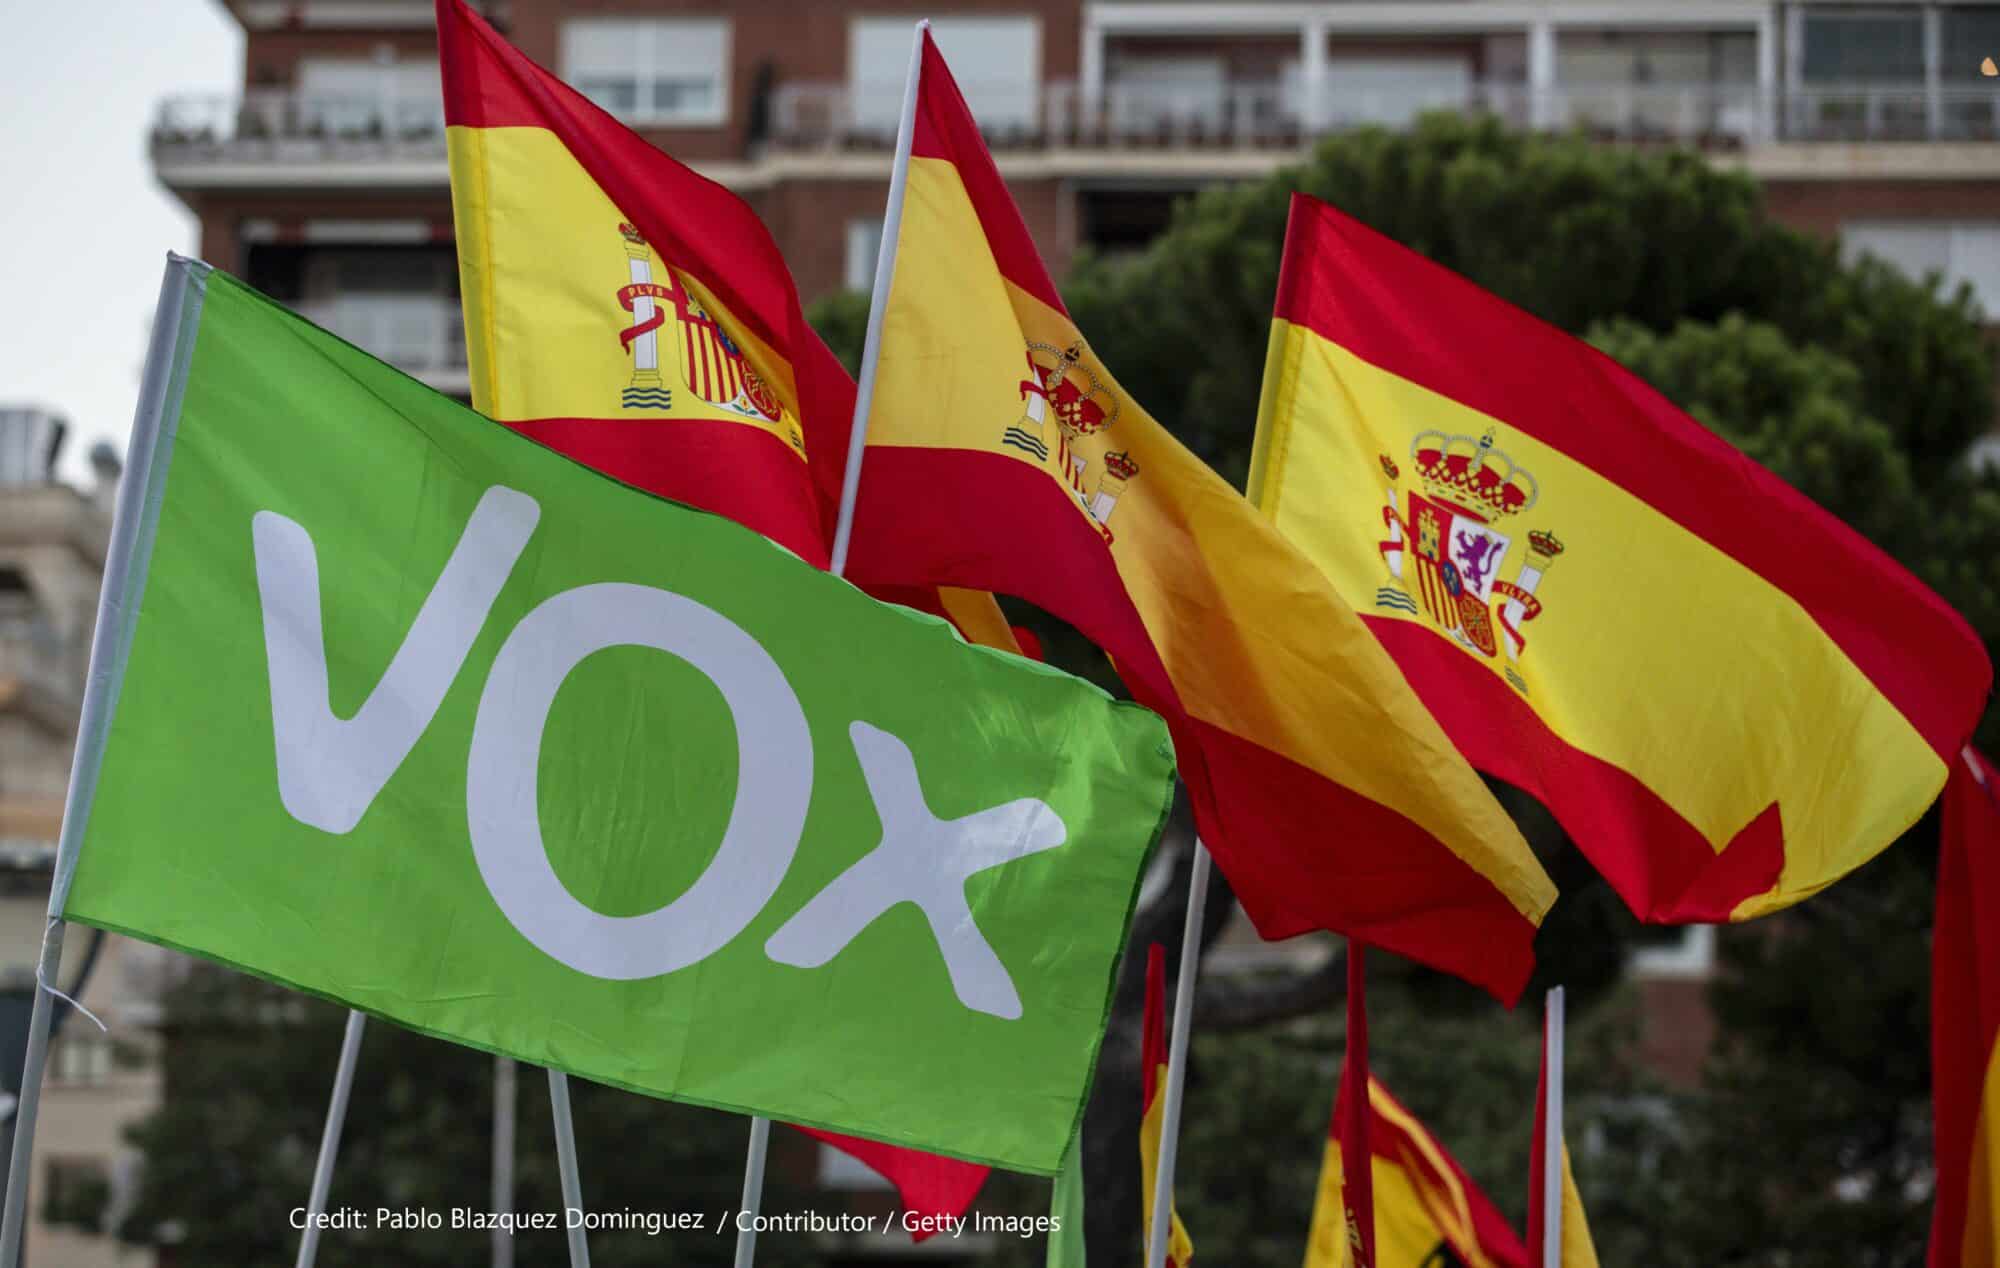 The Inverted World of the Far Right and the Transformation of Nature: Vox’s “Real Ecology” in Spain